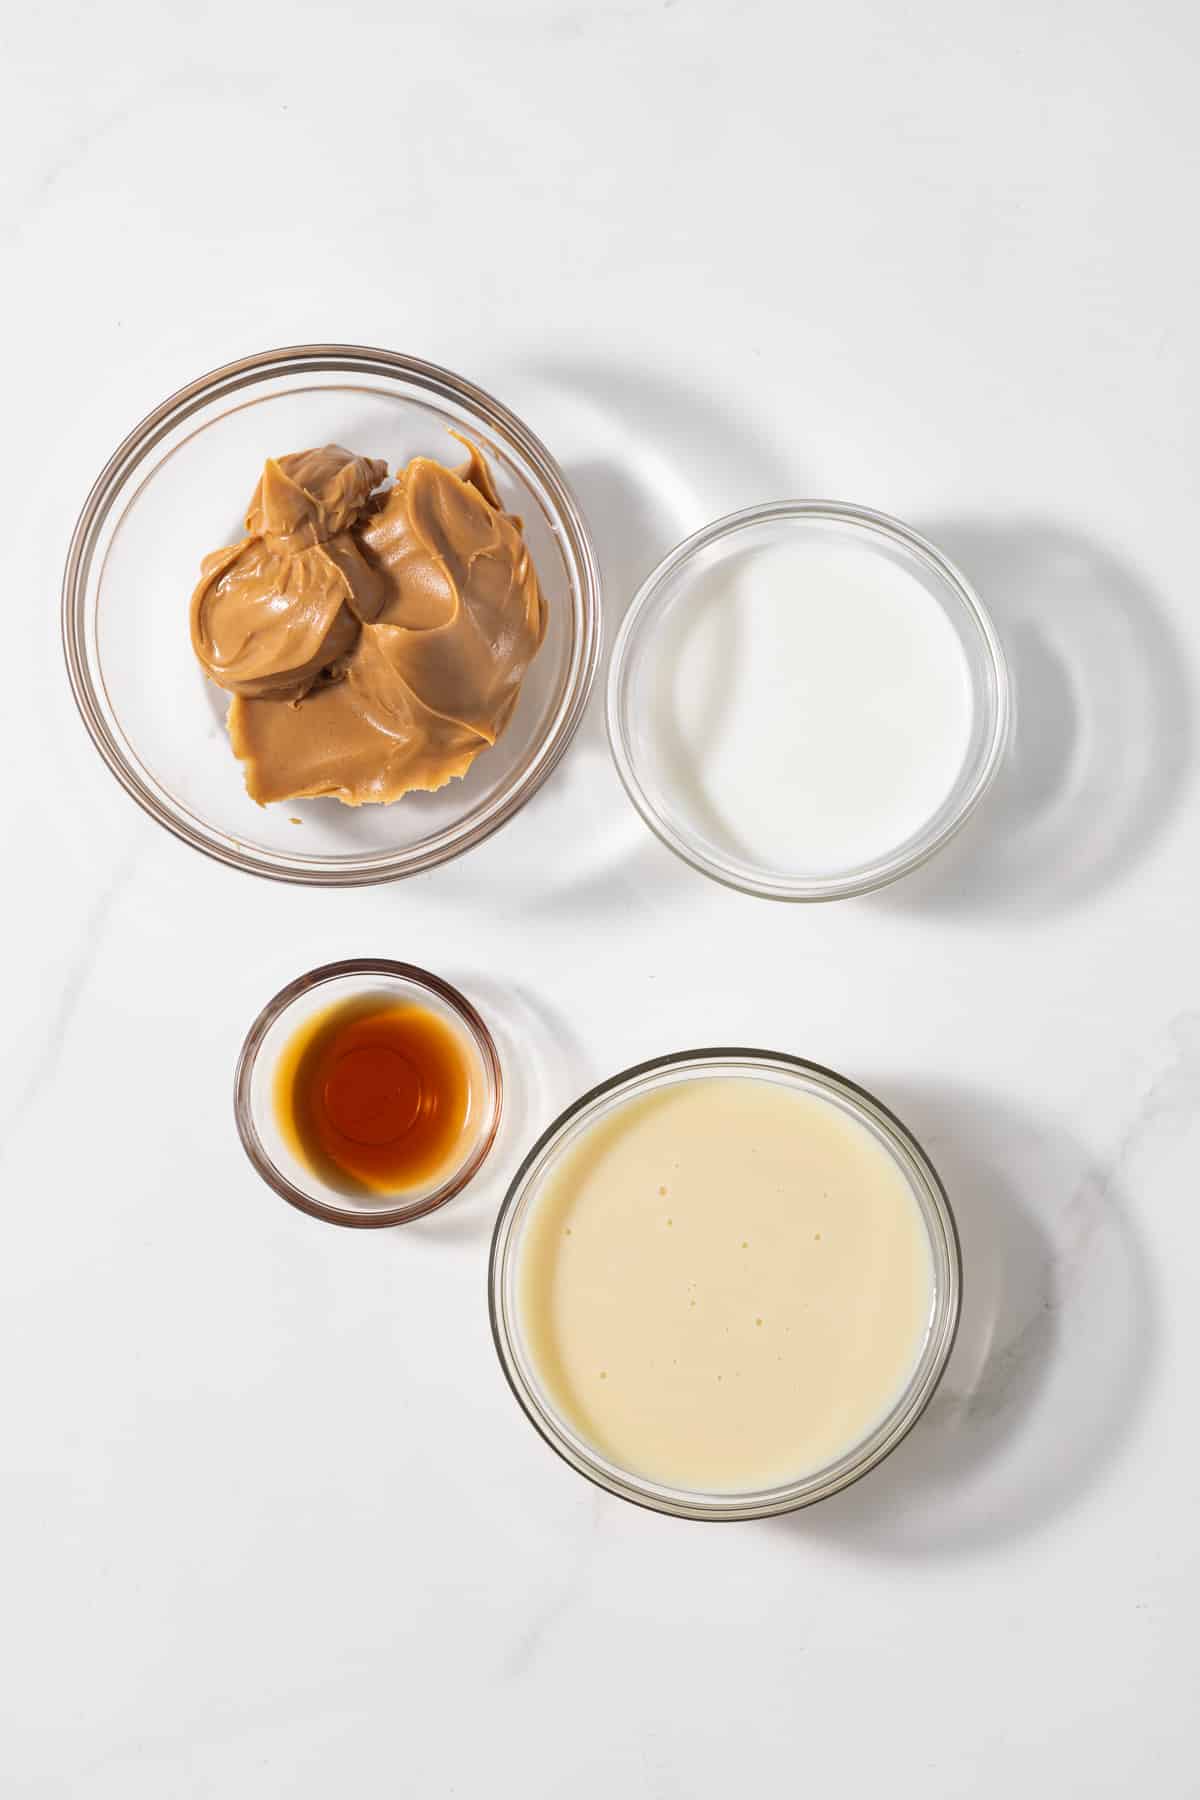 Ingredients for peanut butter dessert sauce in glass bowls.